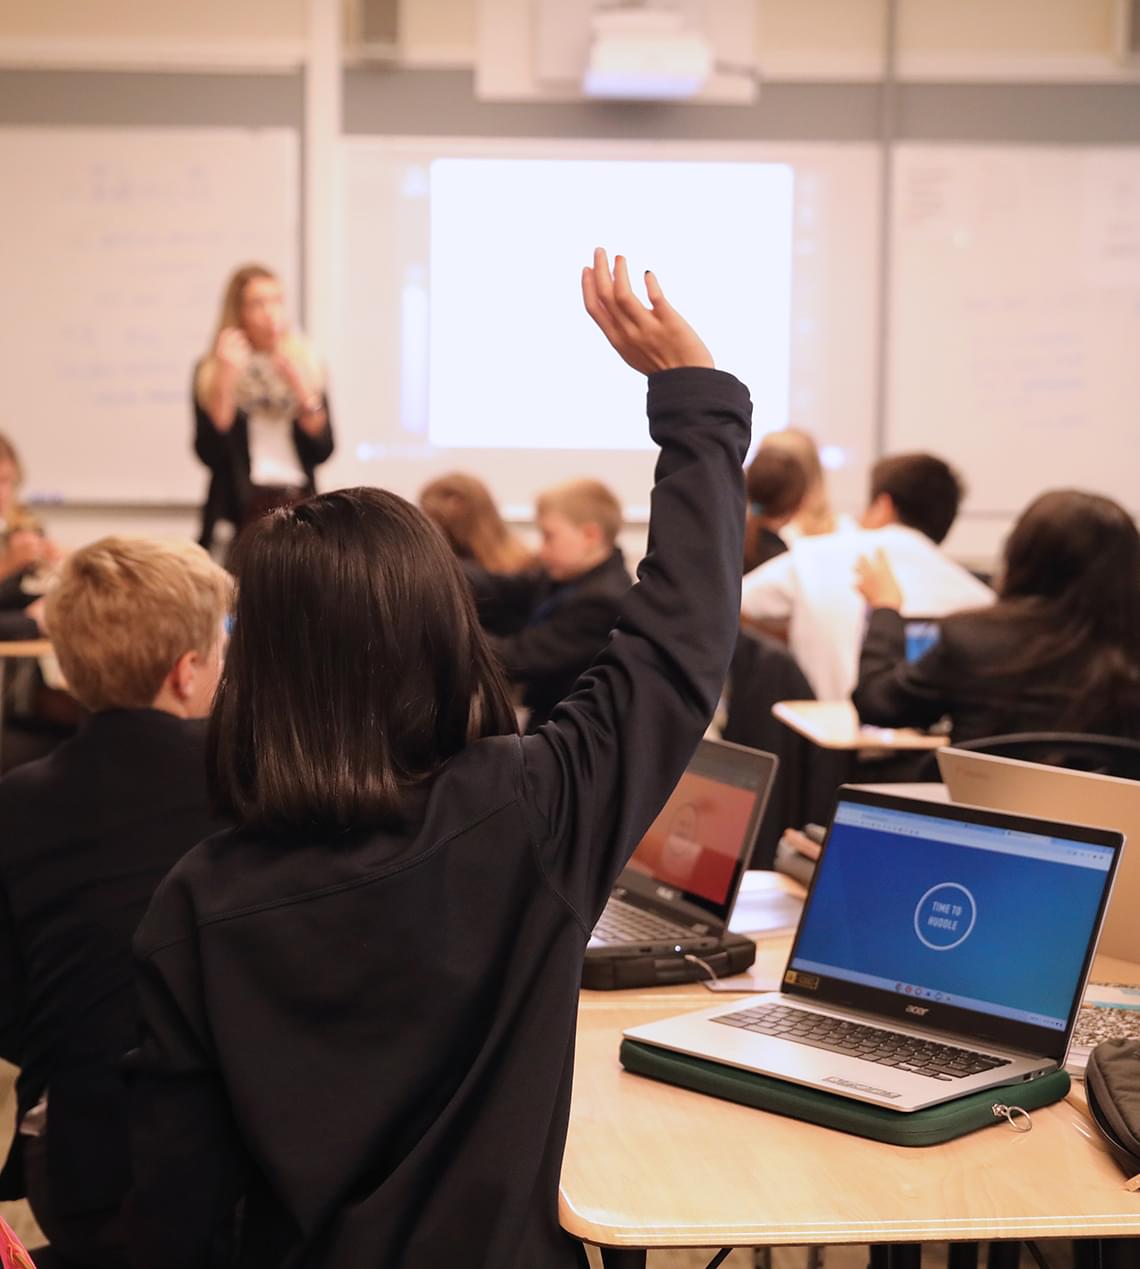 student with hand up in classroom